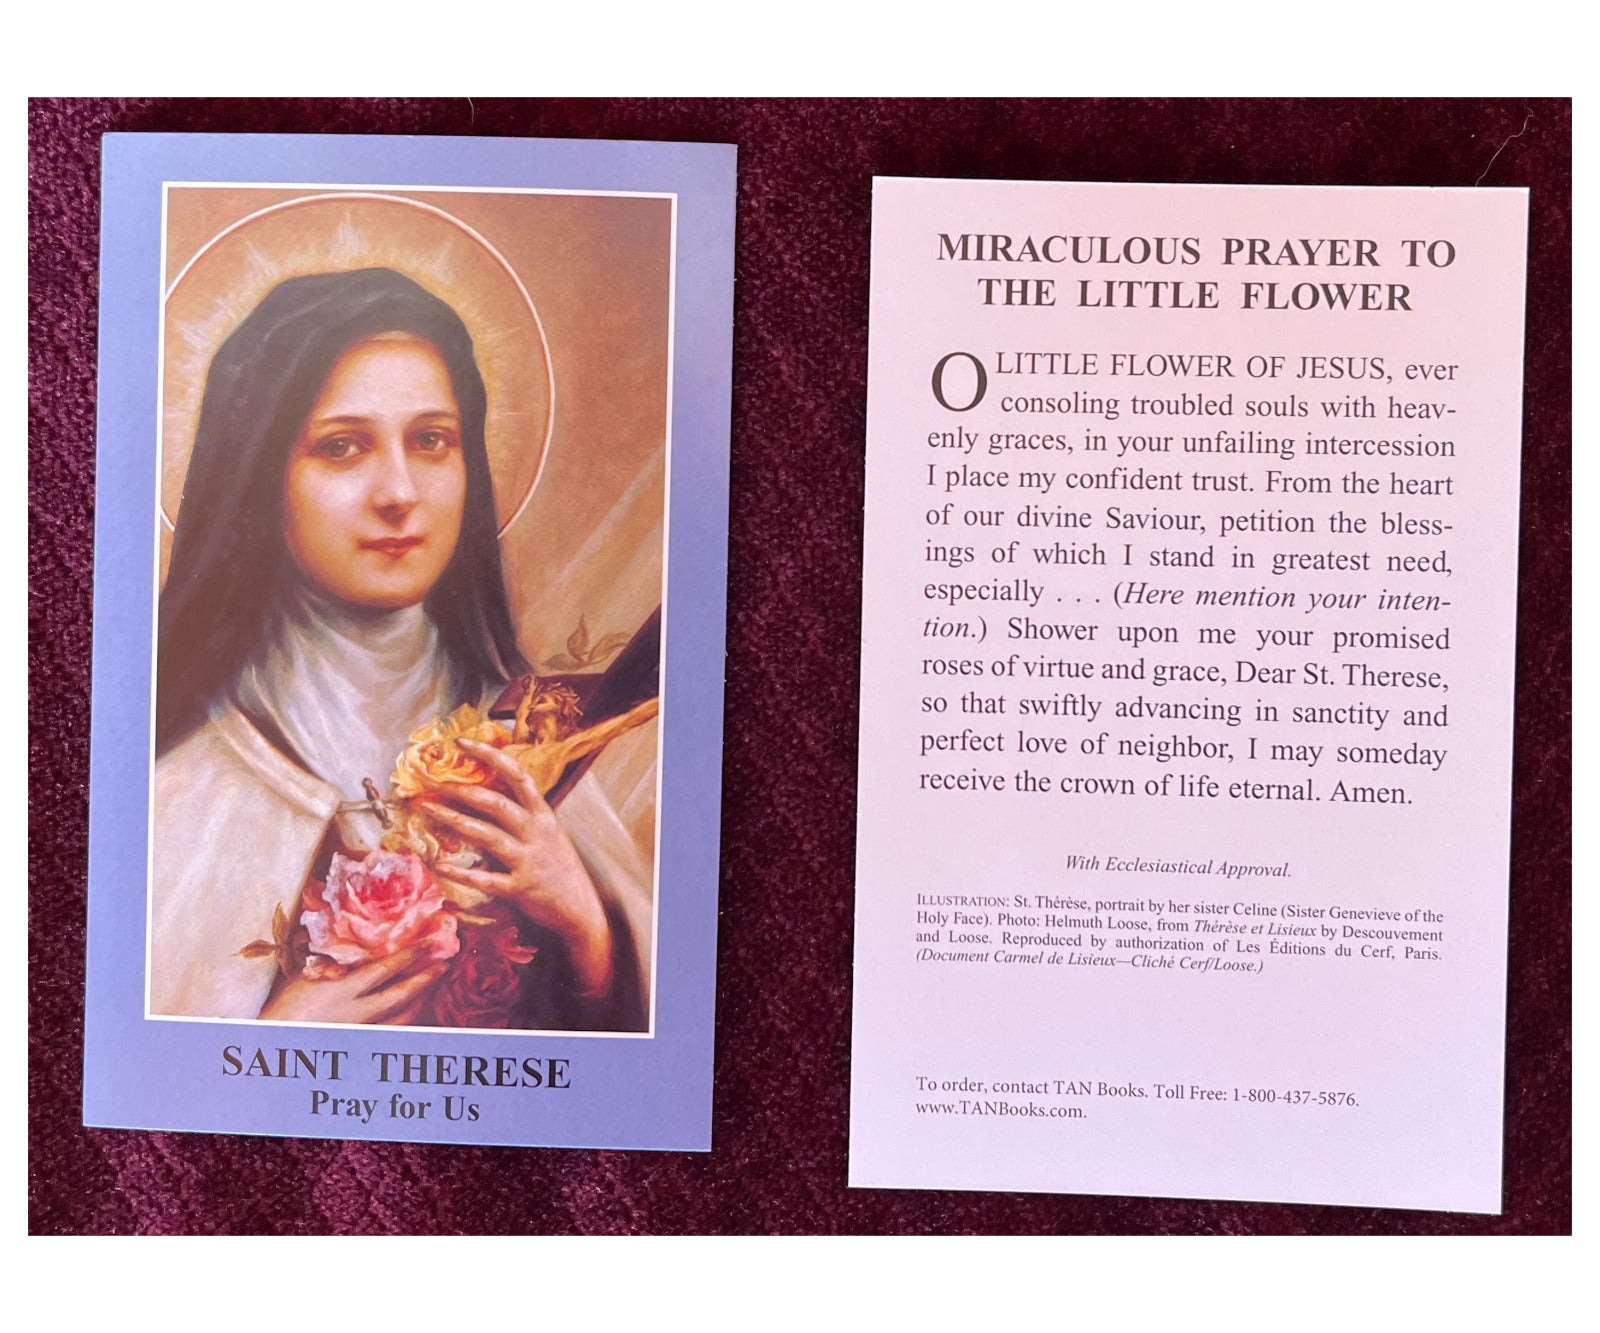 Saint Therese Miraculous Prayer Card - Bob and Penny Lord